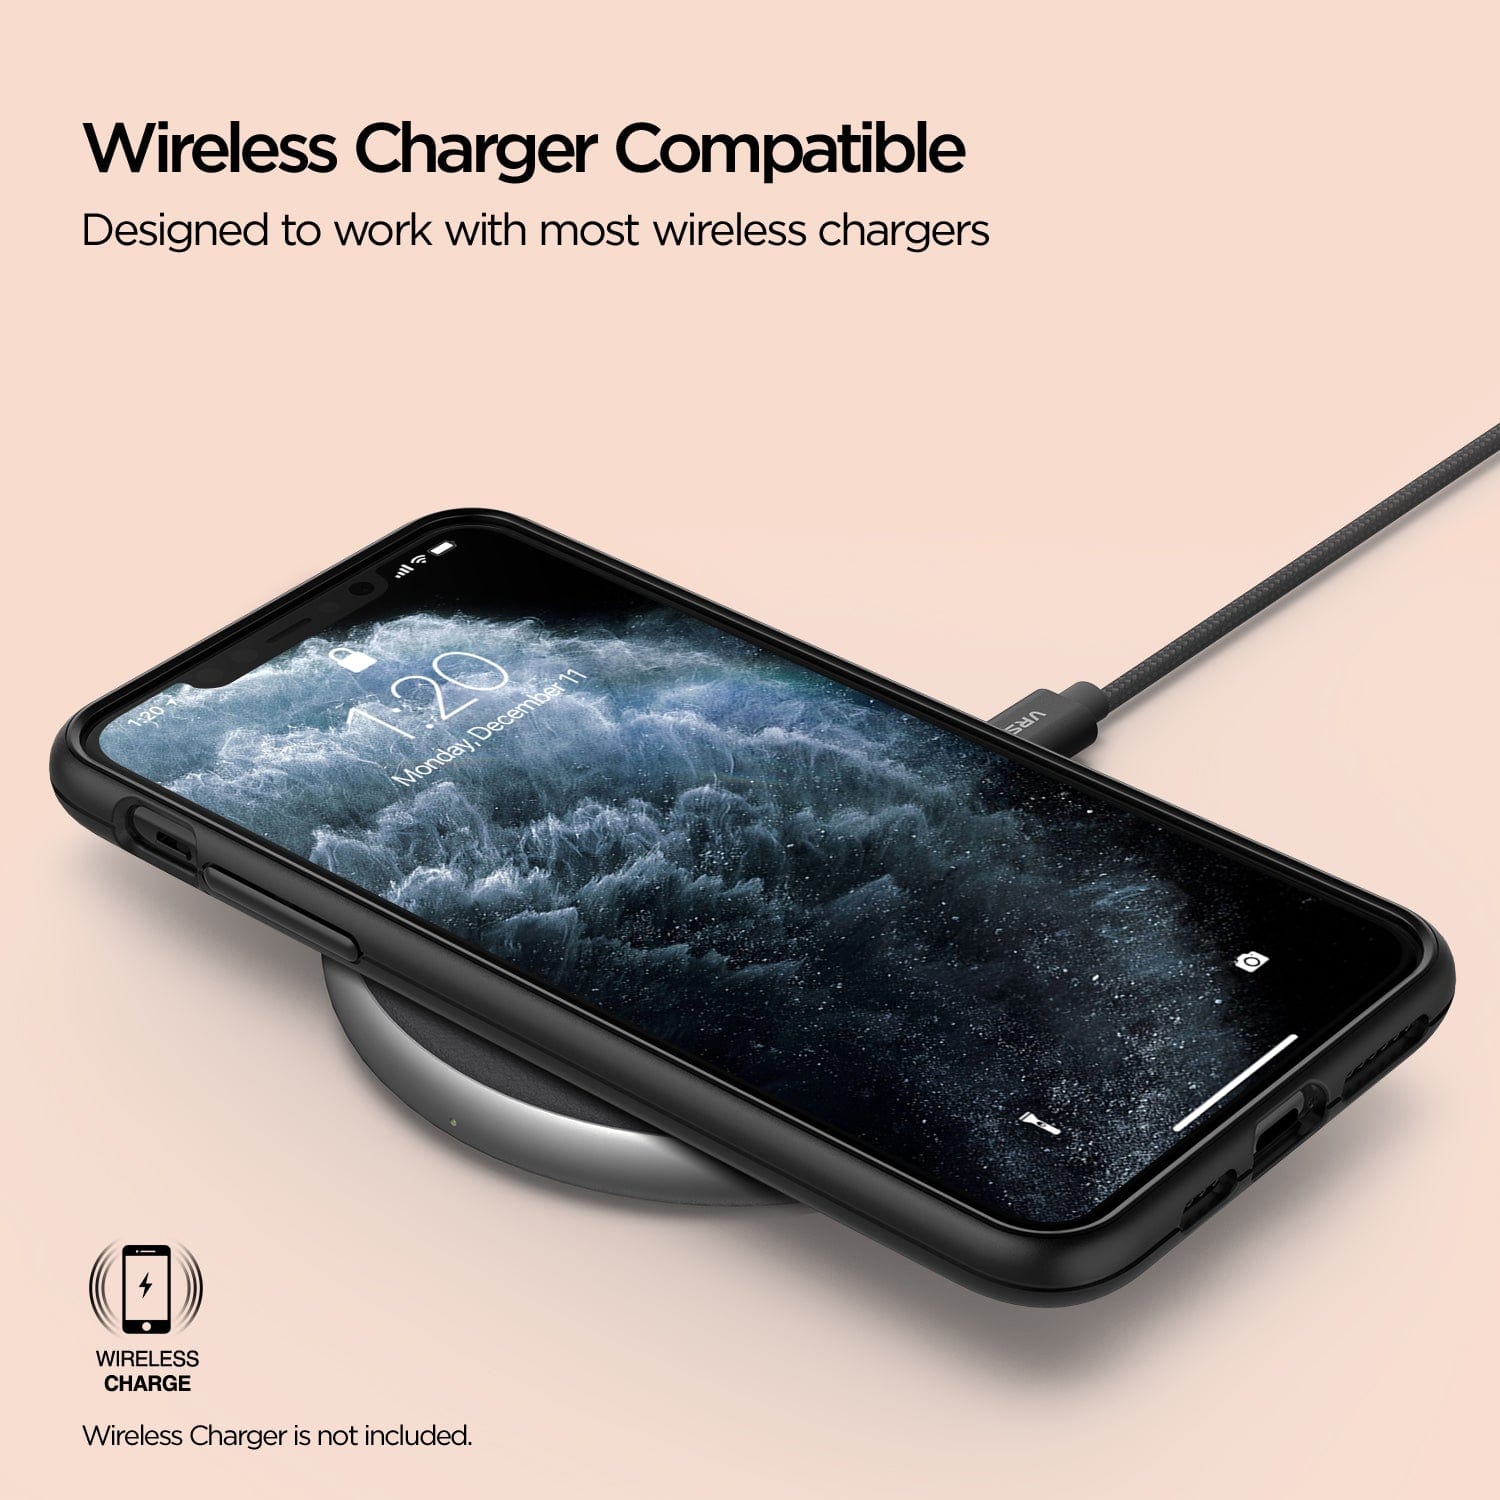 Wireless charger compatible case for iPhone 11 Pro max